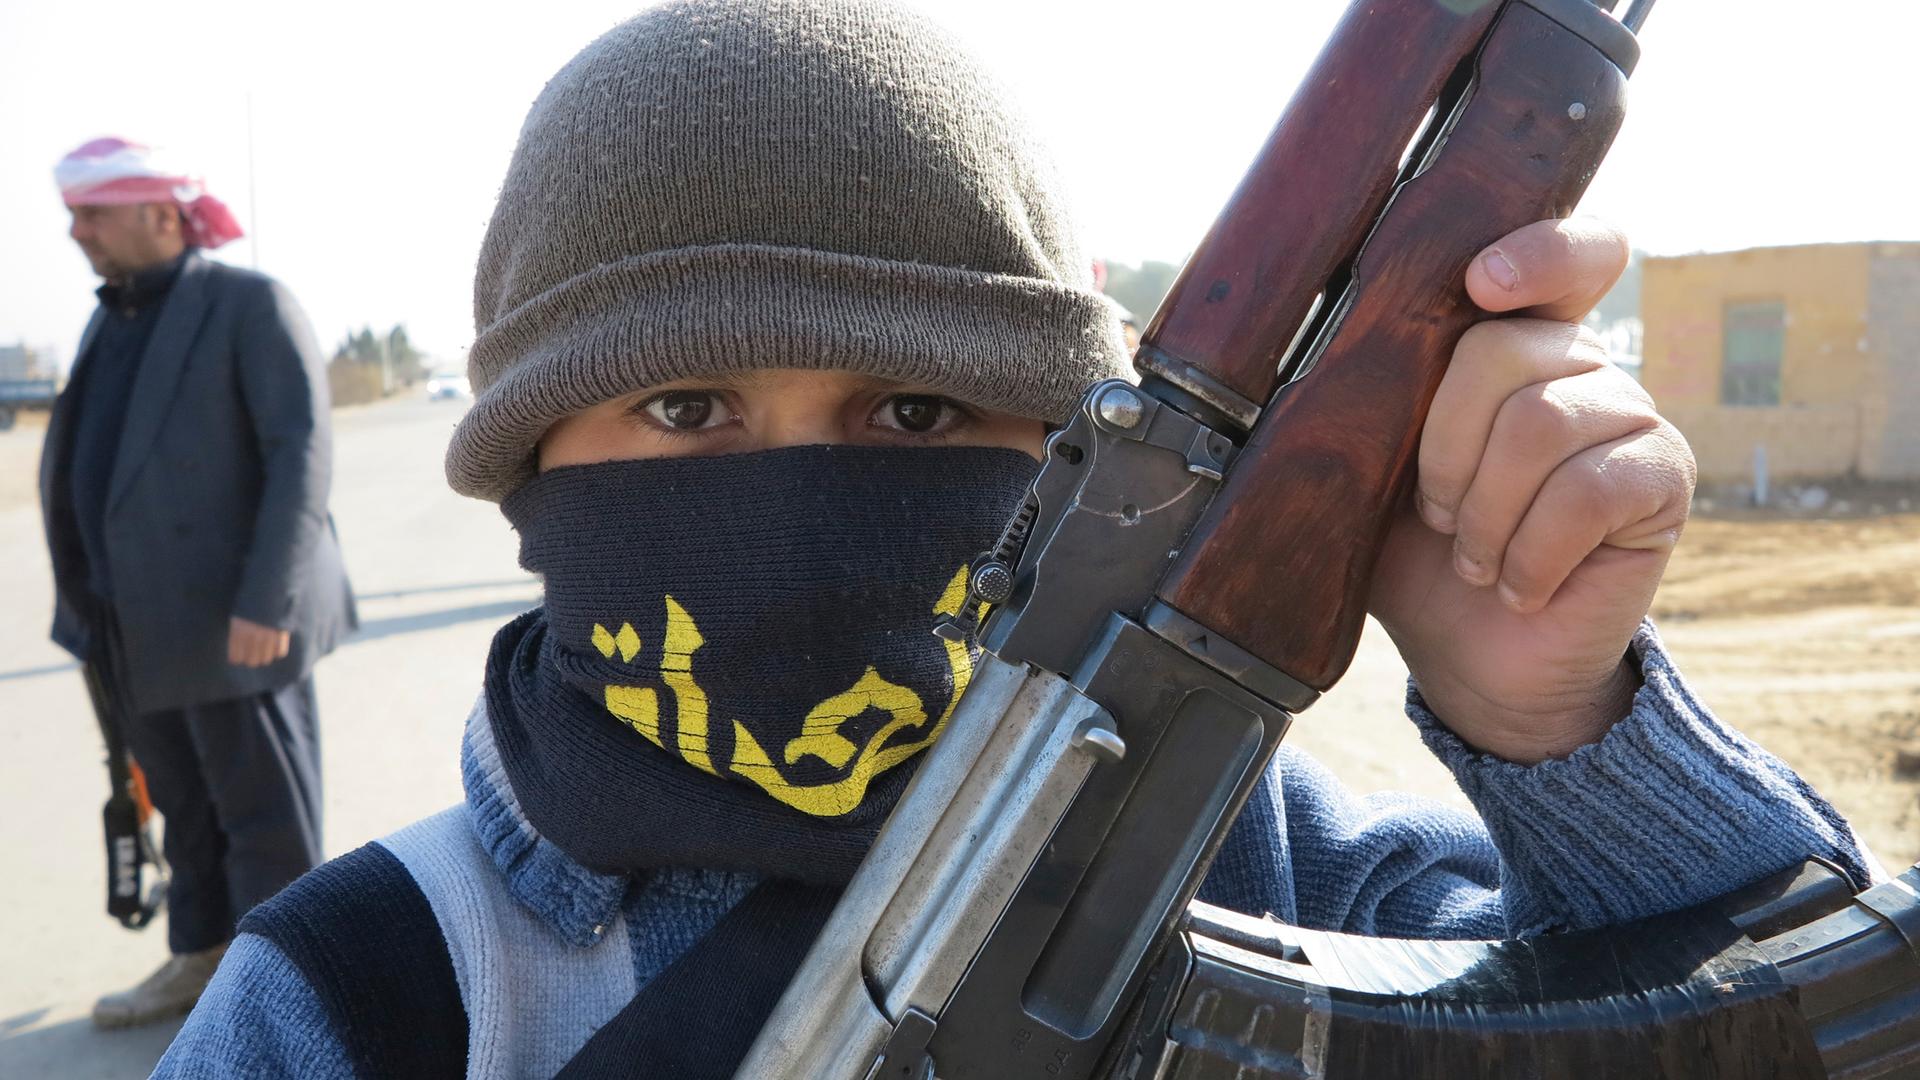 A boy holds up his Kalashnikov rifle on the streets of Ramadi, Monday. He's part of a tribal militia being raised to take part in the fighting between the Iraqi government and al-Qaeda linked militants. His militia appears to be on the government side at 